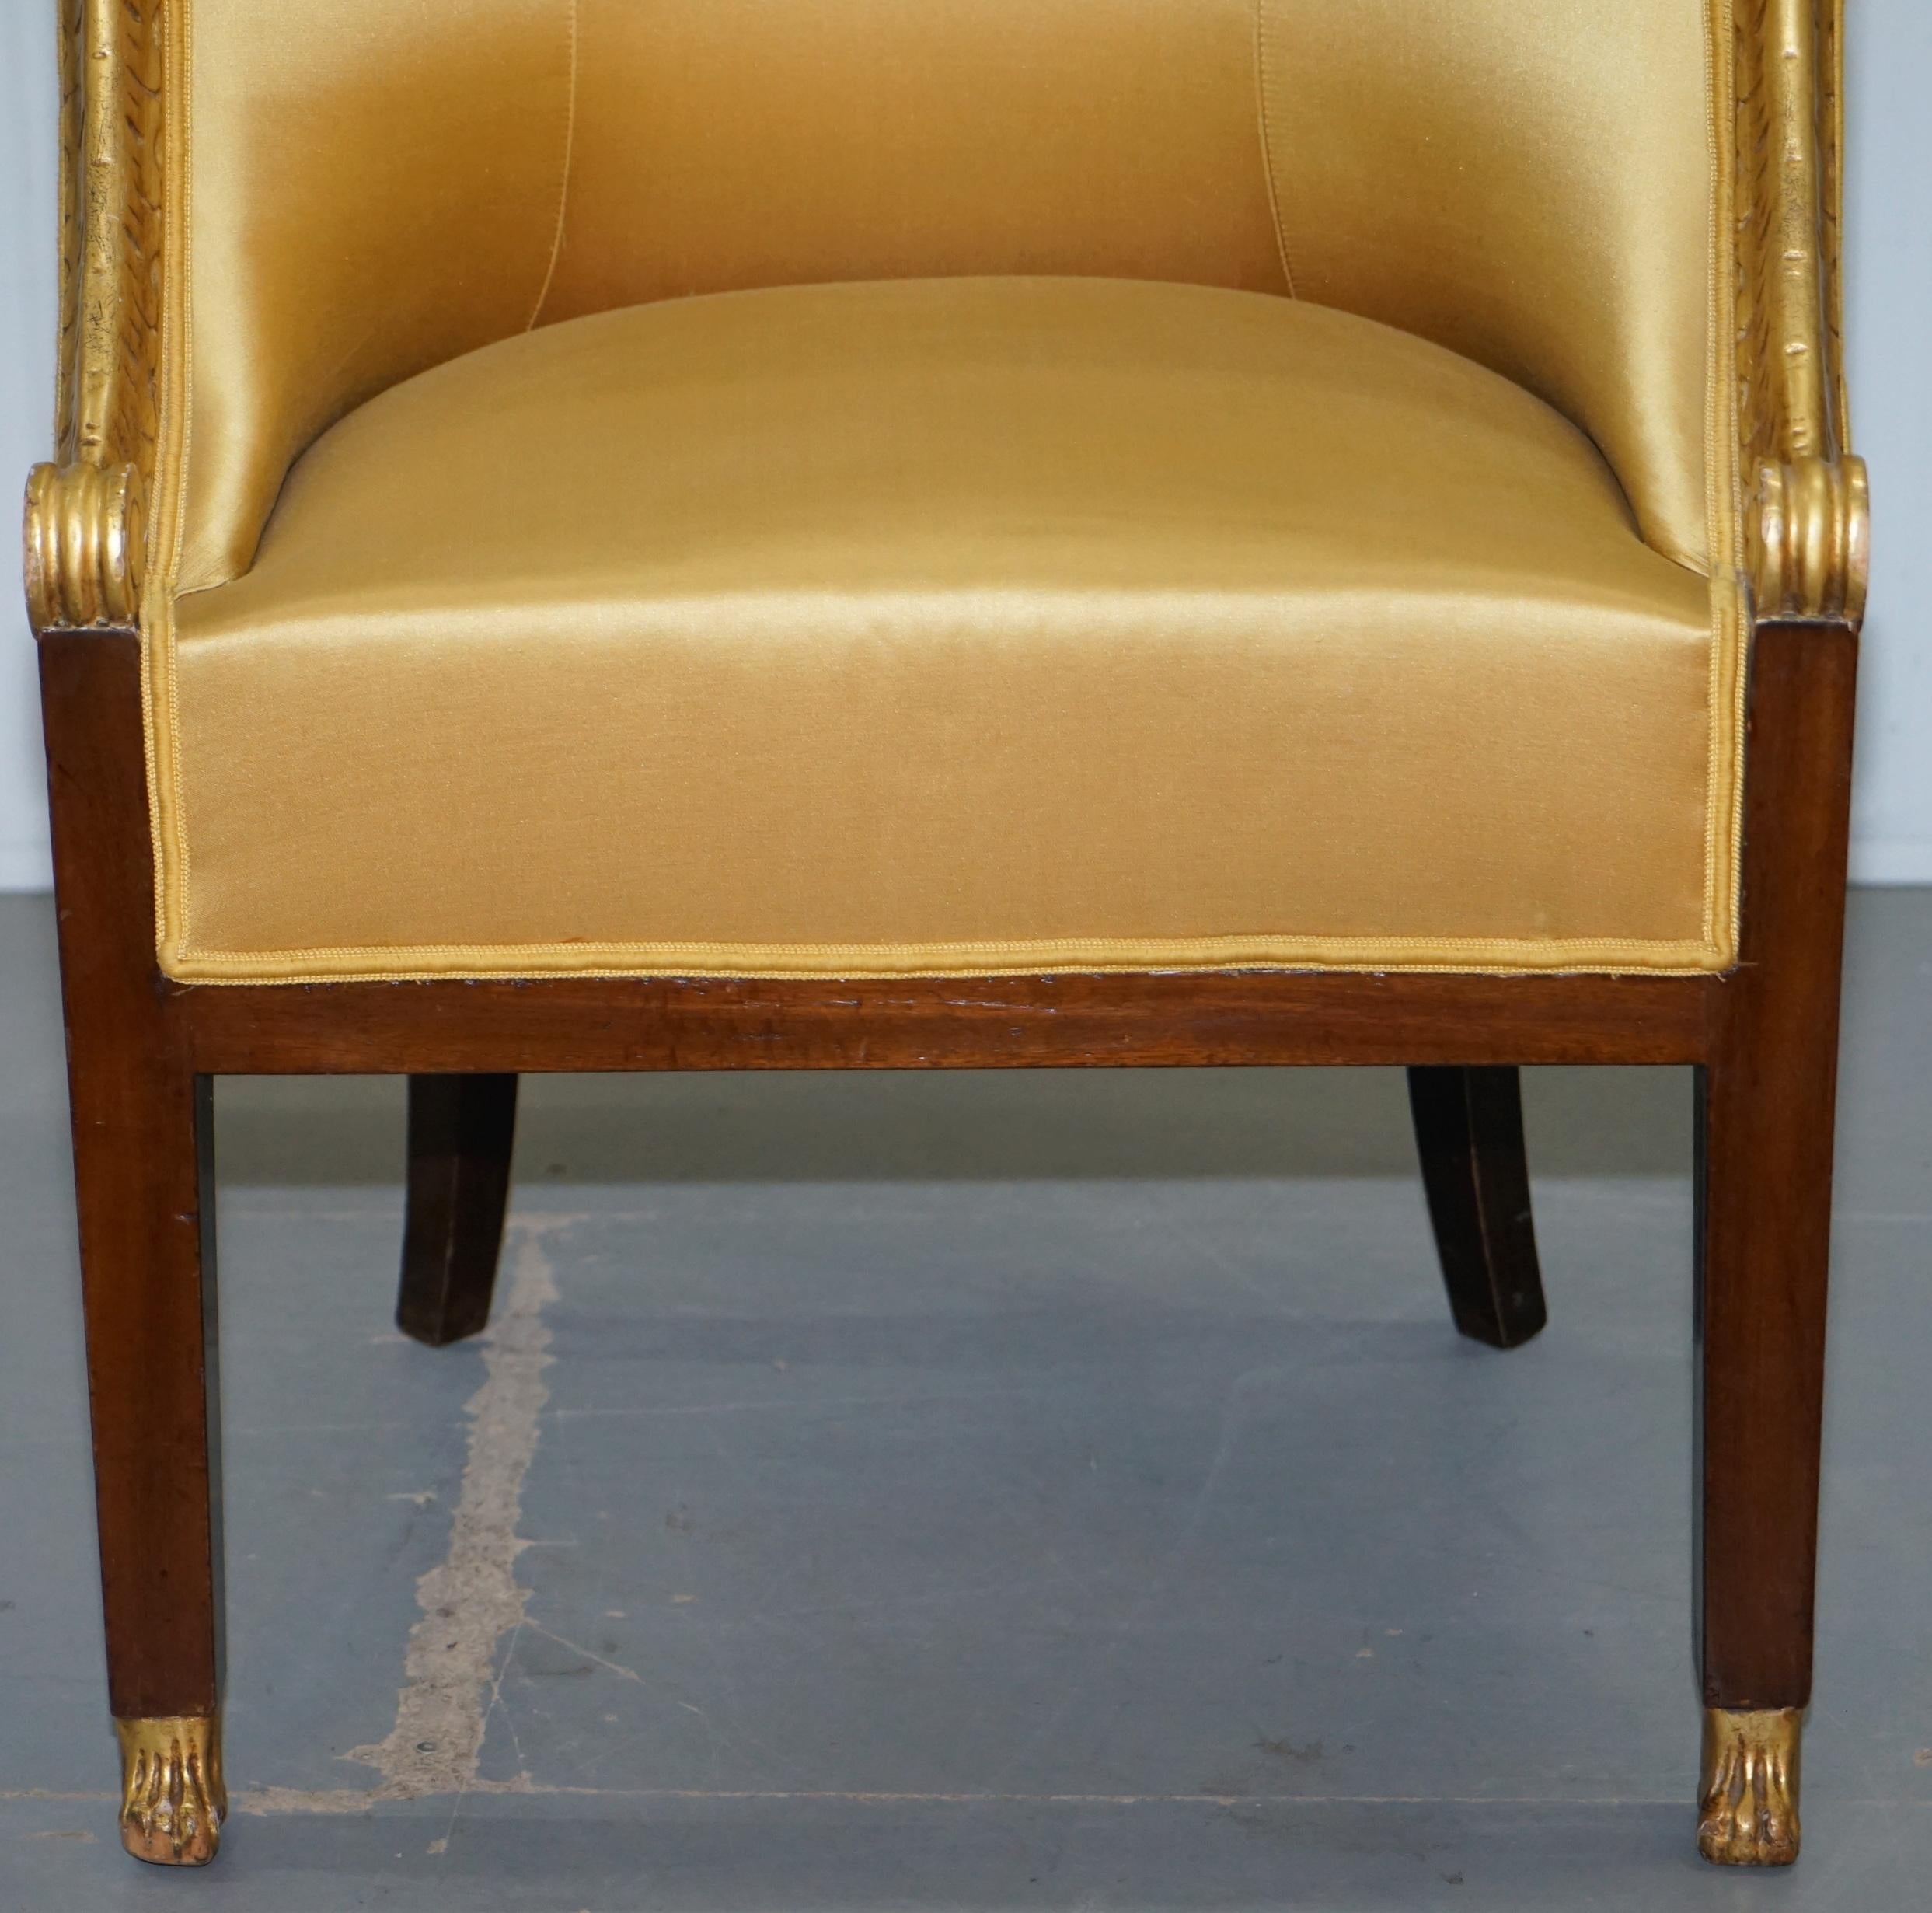 1870 French Empire Marquetry Inlaid Suite Berger Armchairs & Settee Canape, Pair For Sale 5